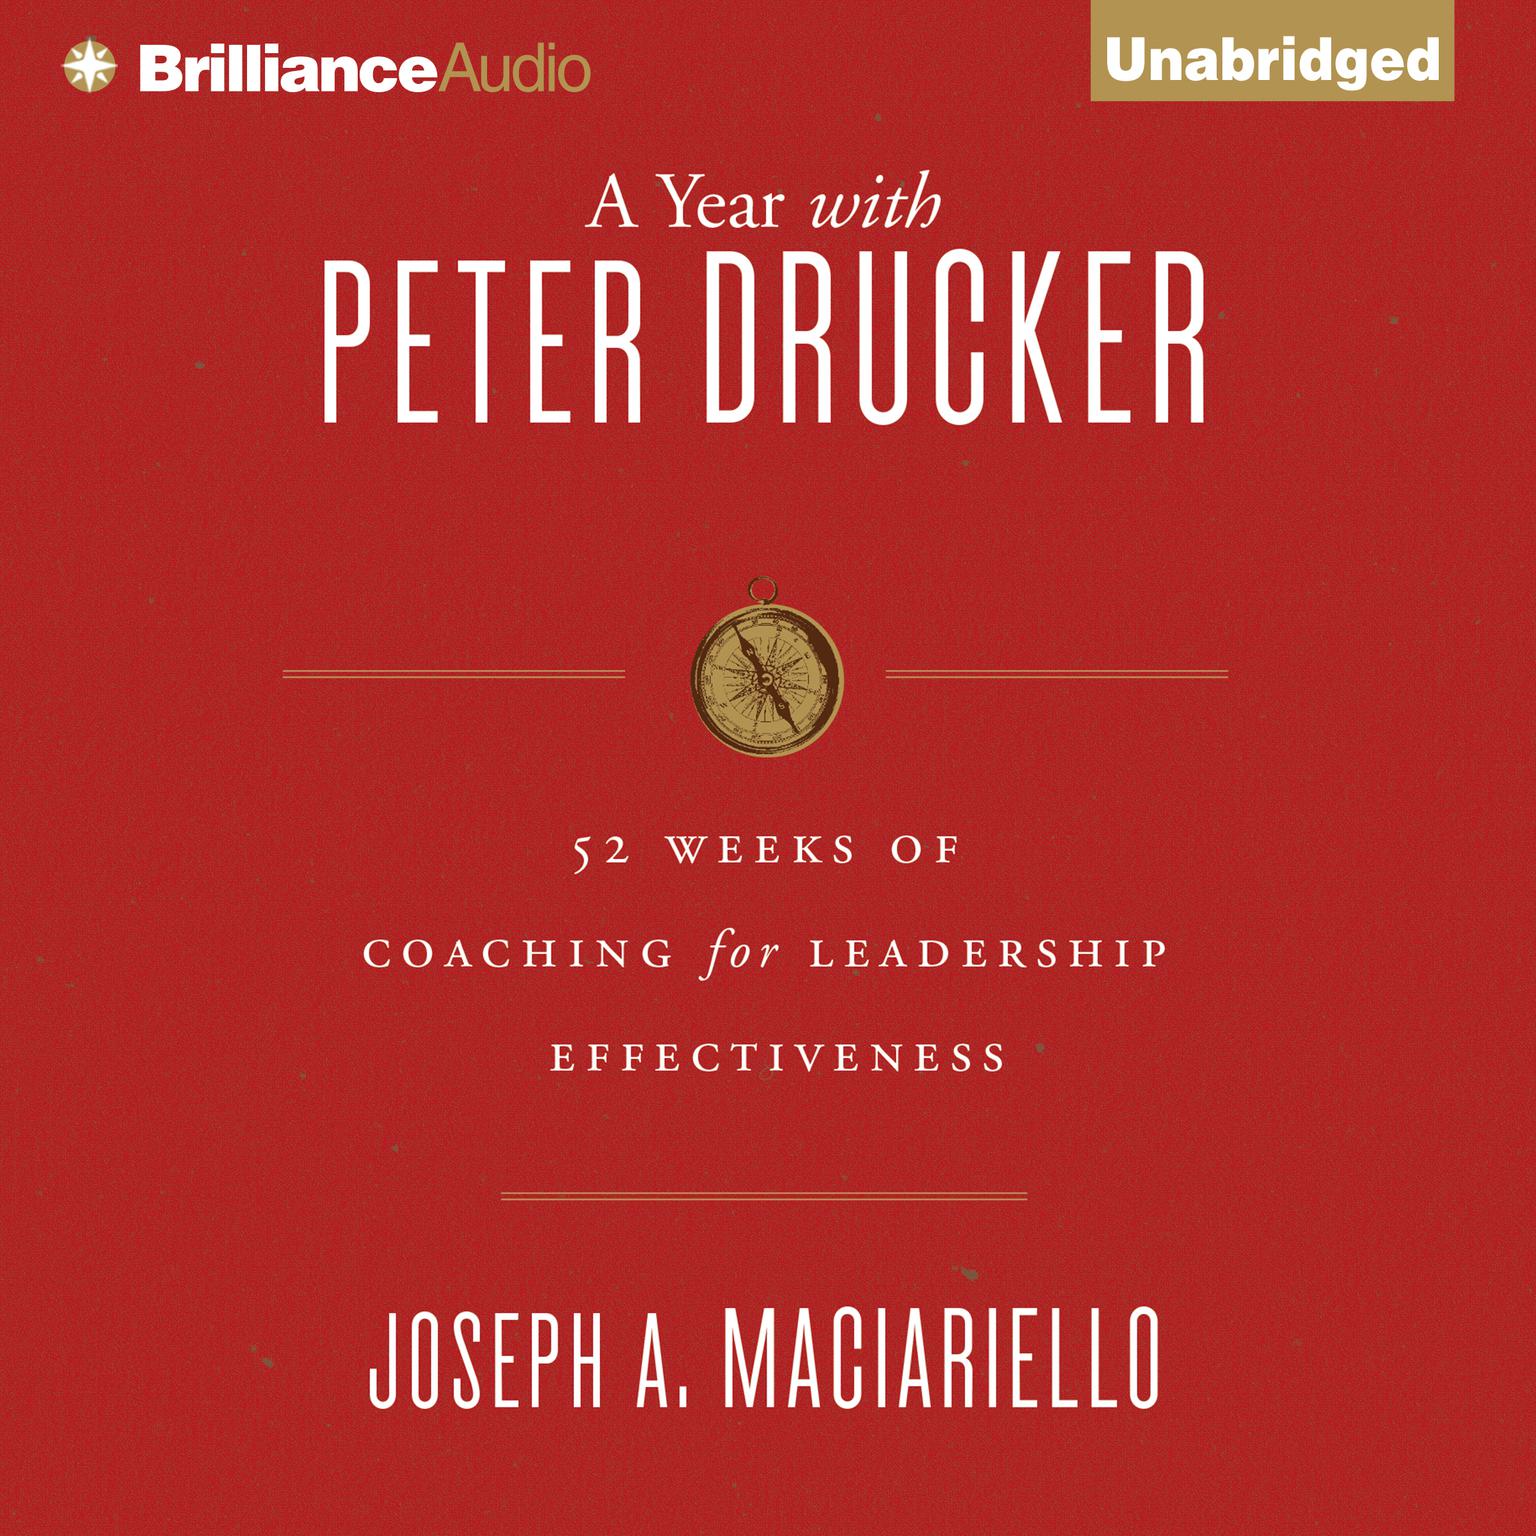 A Year with Peter Drucker: 52 Weeks of Coaching for Leadership Effectiveness Audiobook, by Joseph A. Maciariello